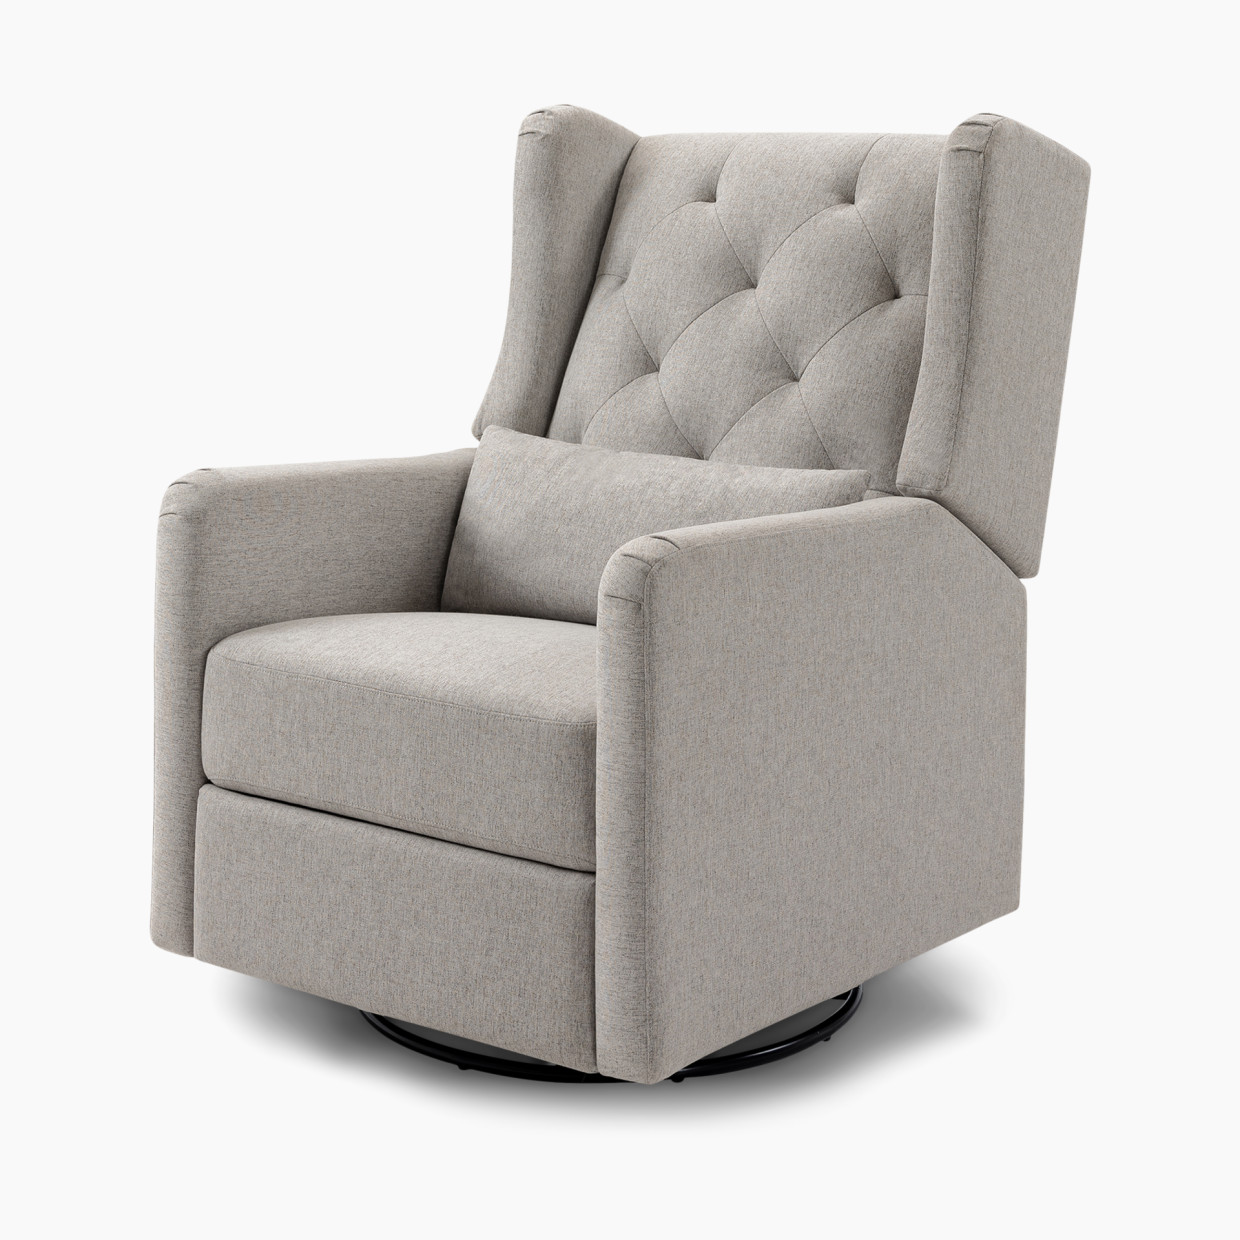 DaVinci Everly Recliner and Swivel Glider - Performance Grey Eco Weave.